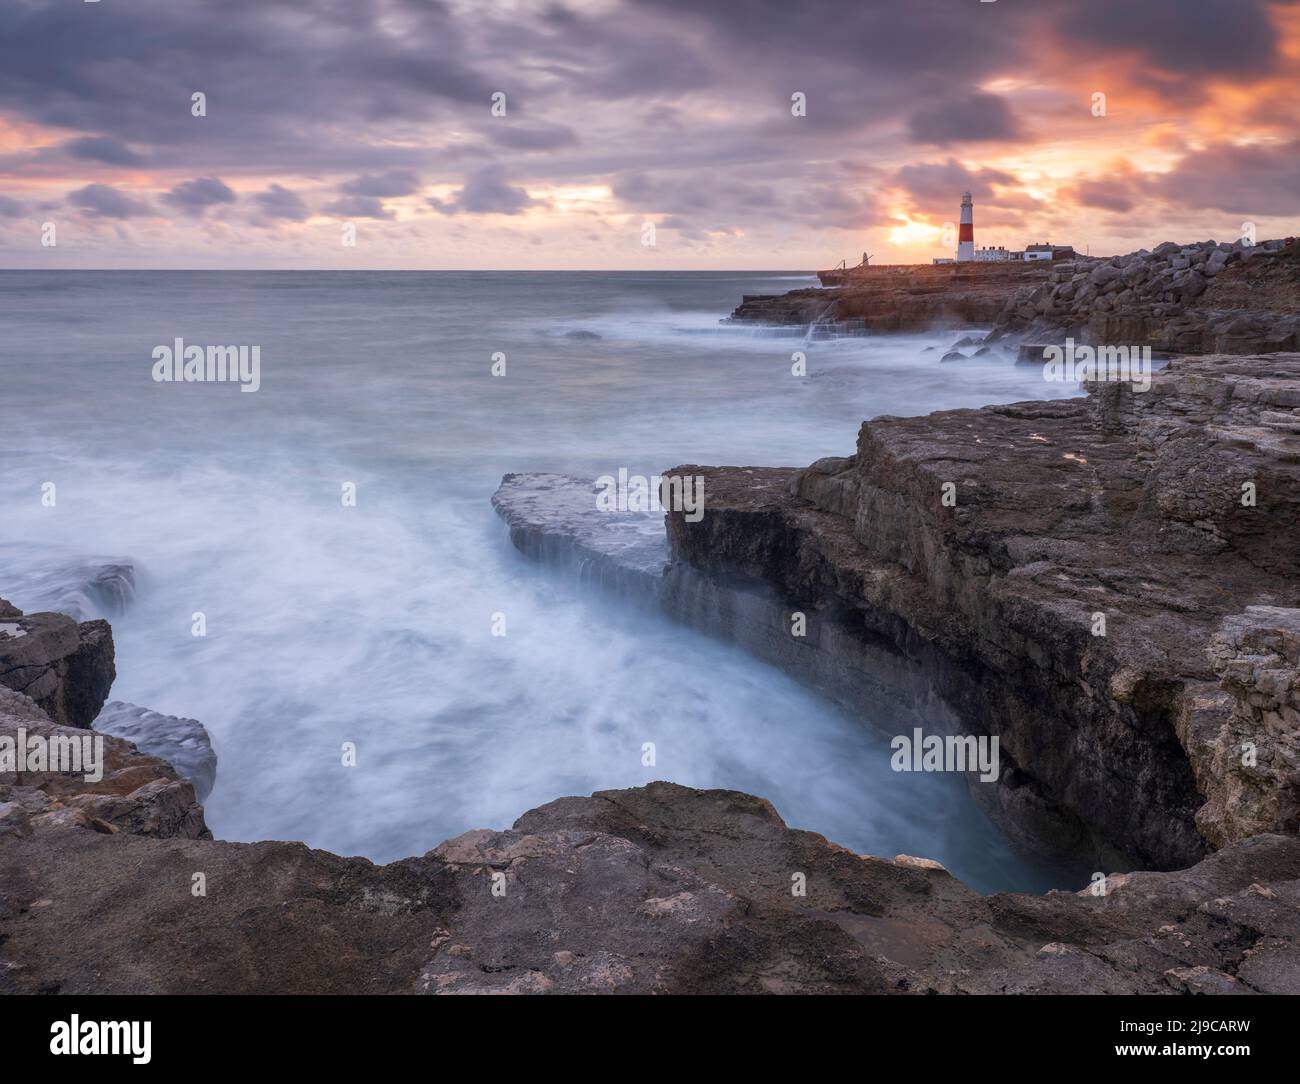 Looking across rocky ledges towards Portland Bill lighthouse in Dorset at sunset. Stock Photo